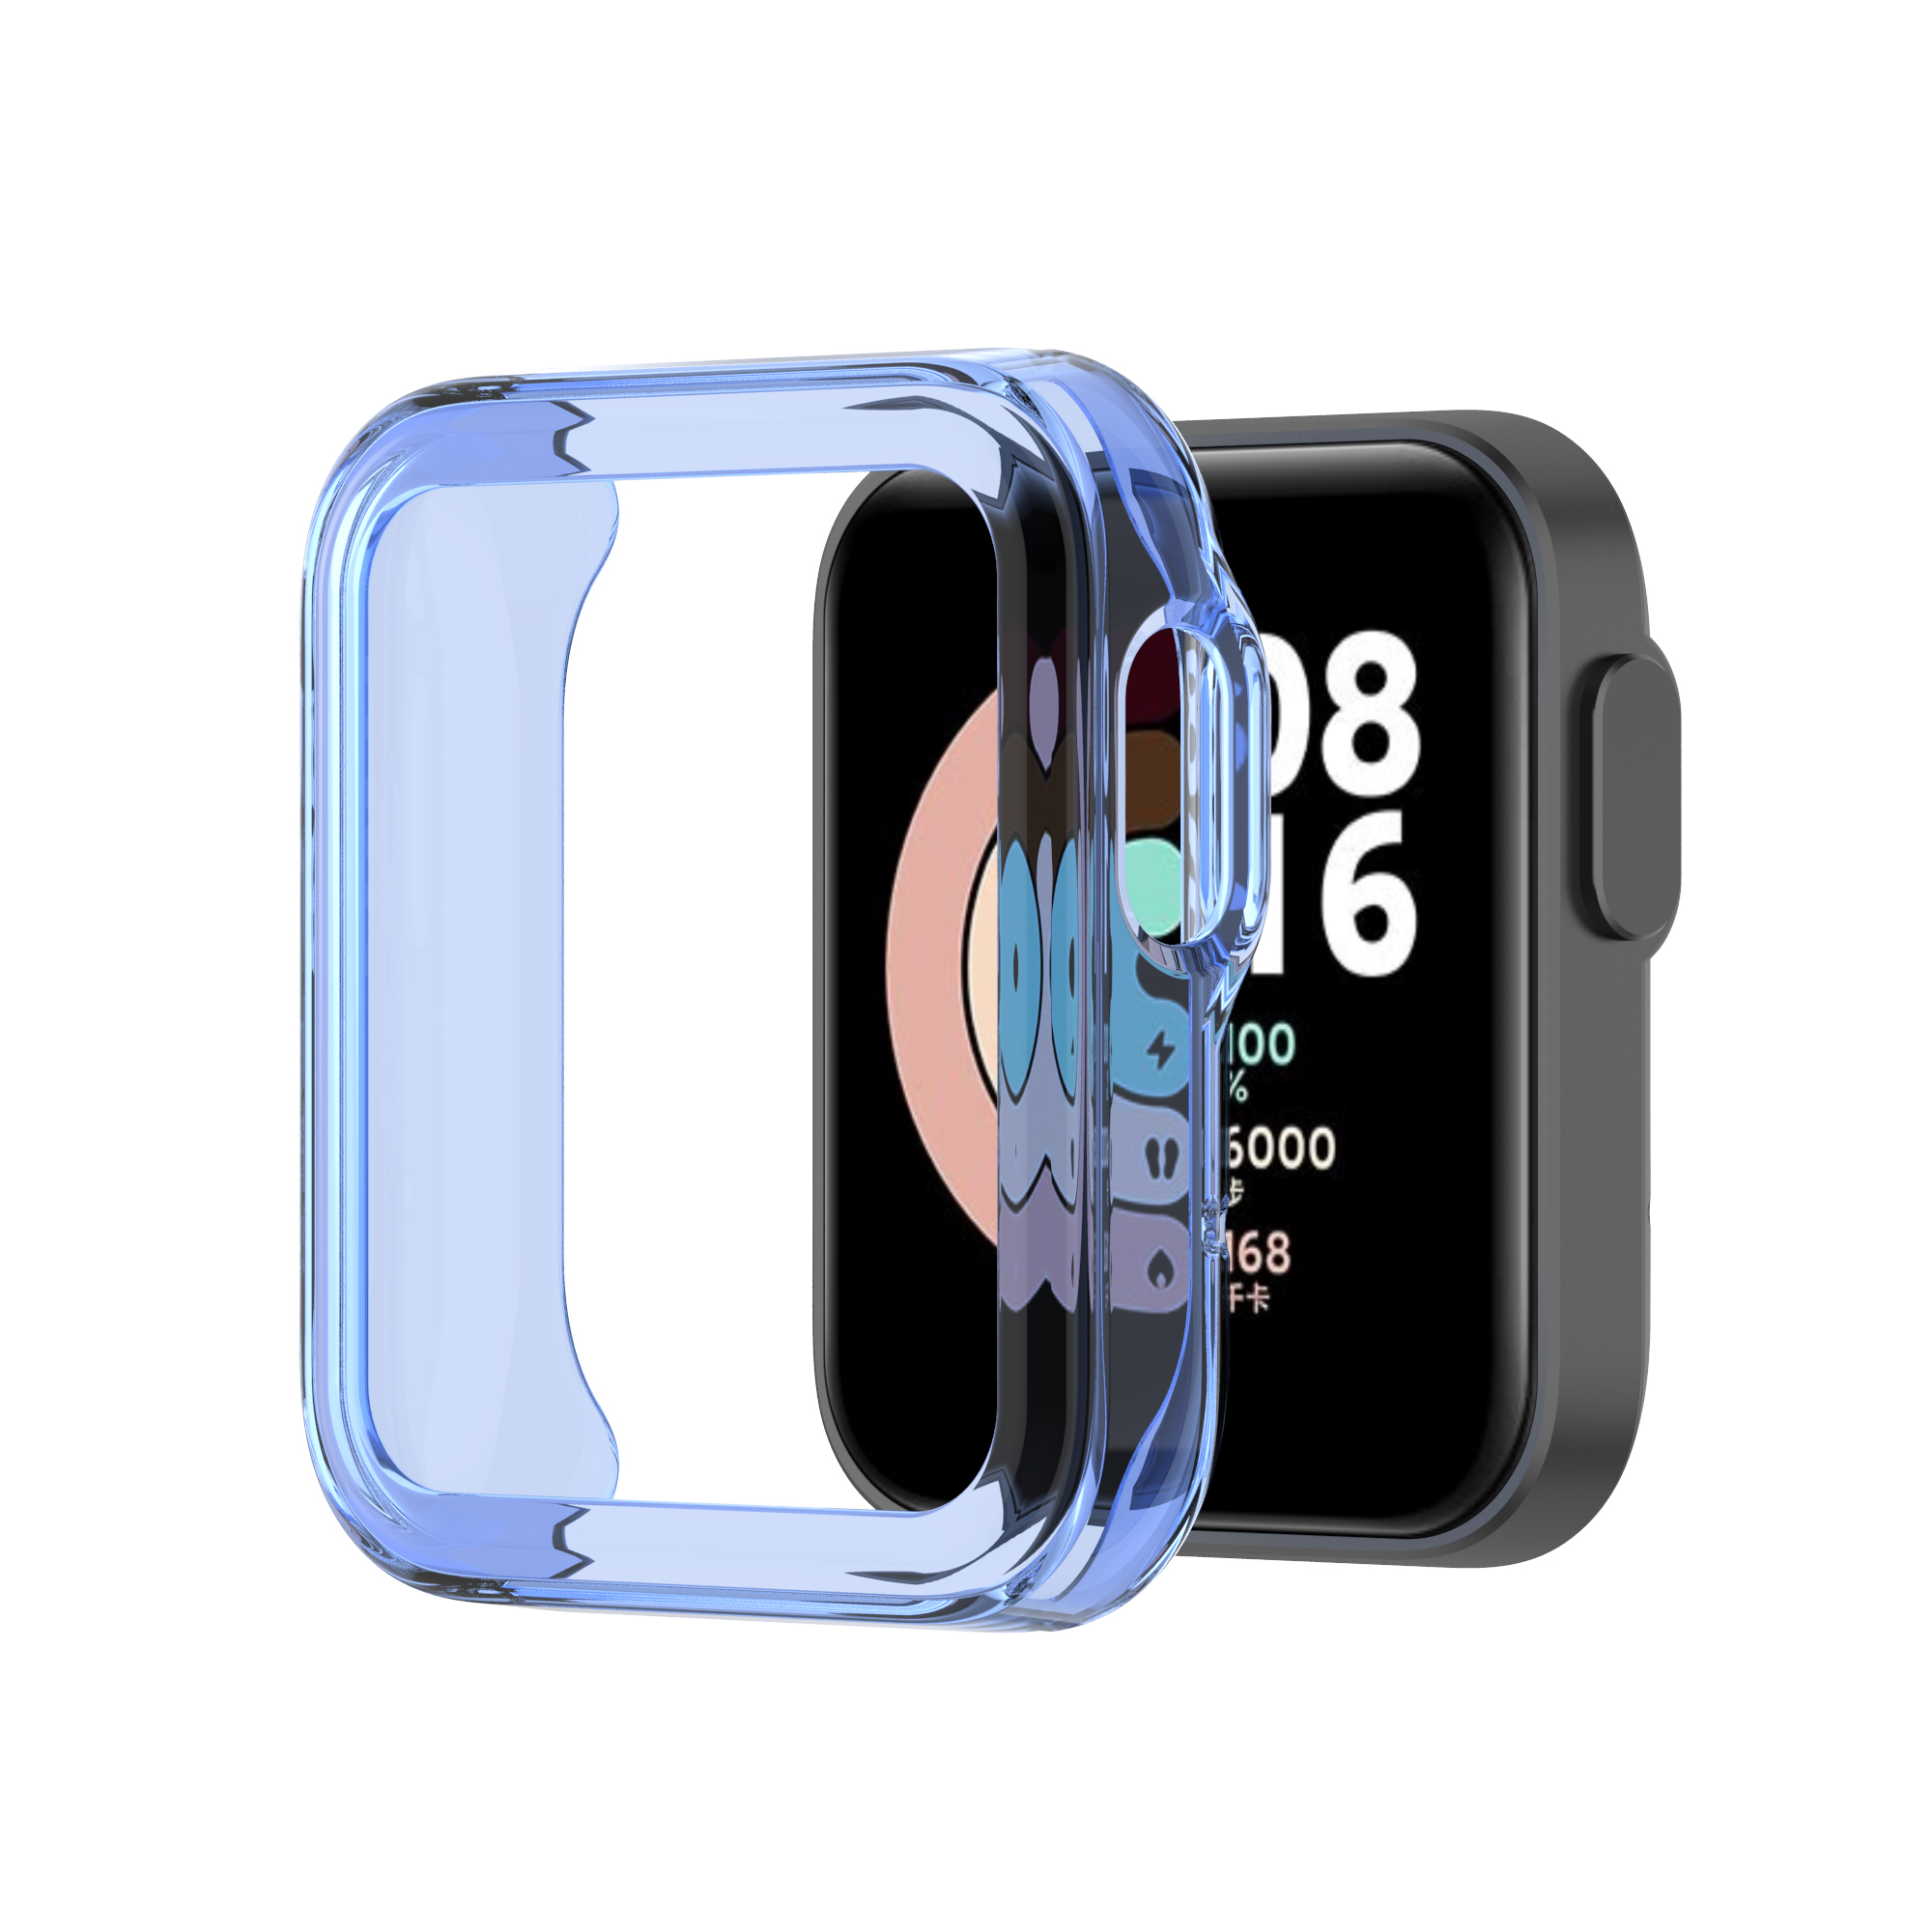 Bakeey-Transparent-TPU-Half-pack-Watch-Case-Cover-Watch-Protector-For-Xiaomi-Mi-Watch-Lite-1819481-13